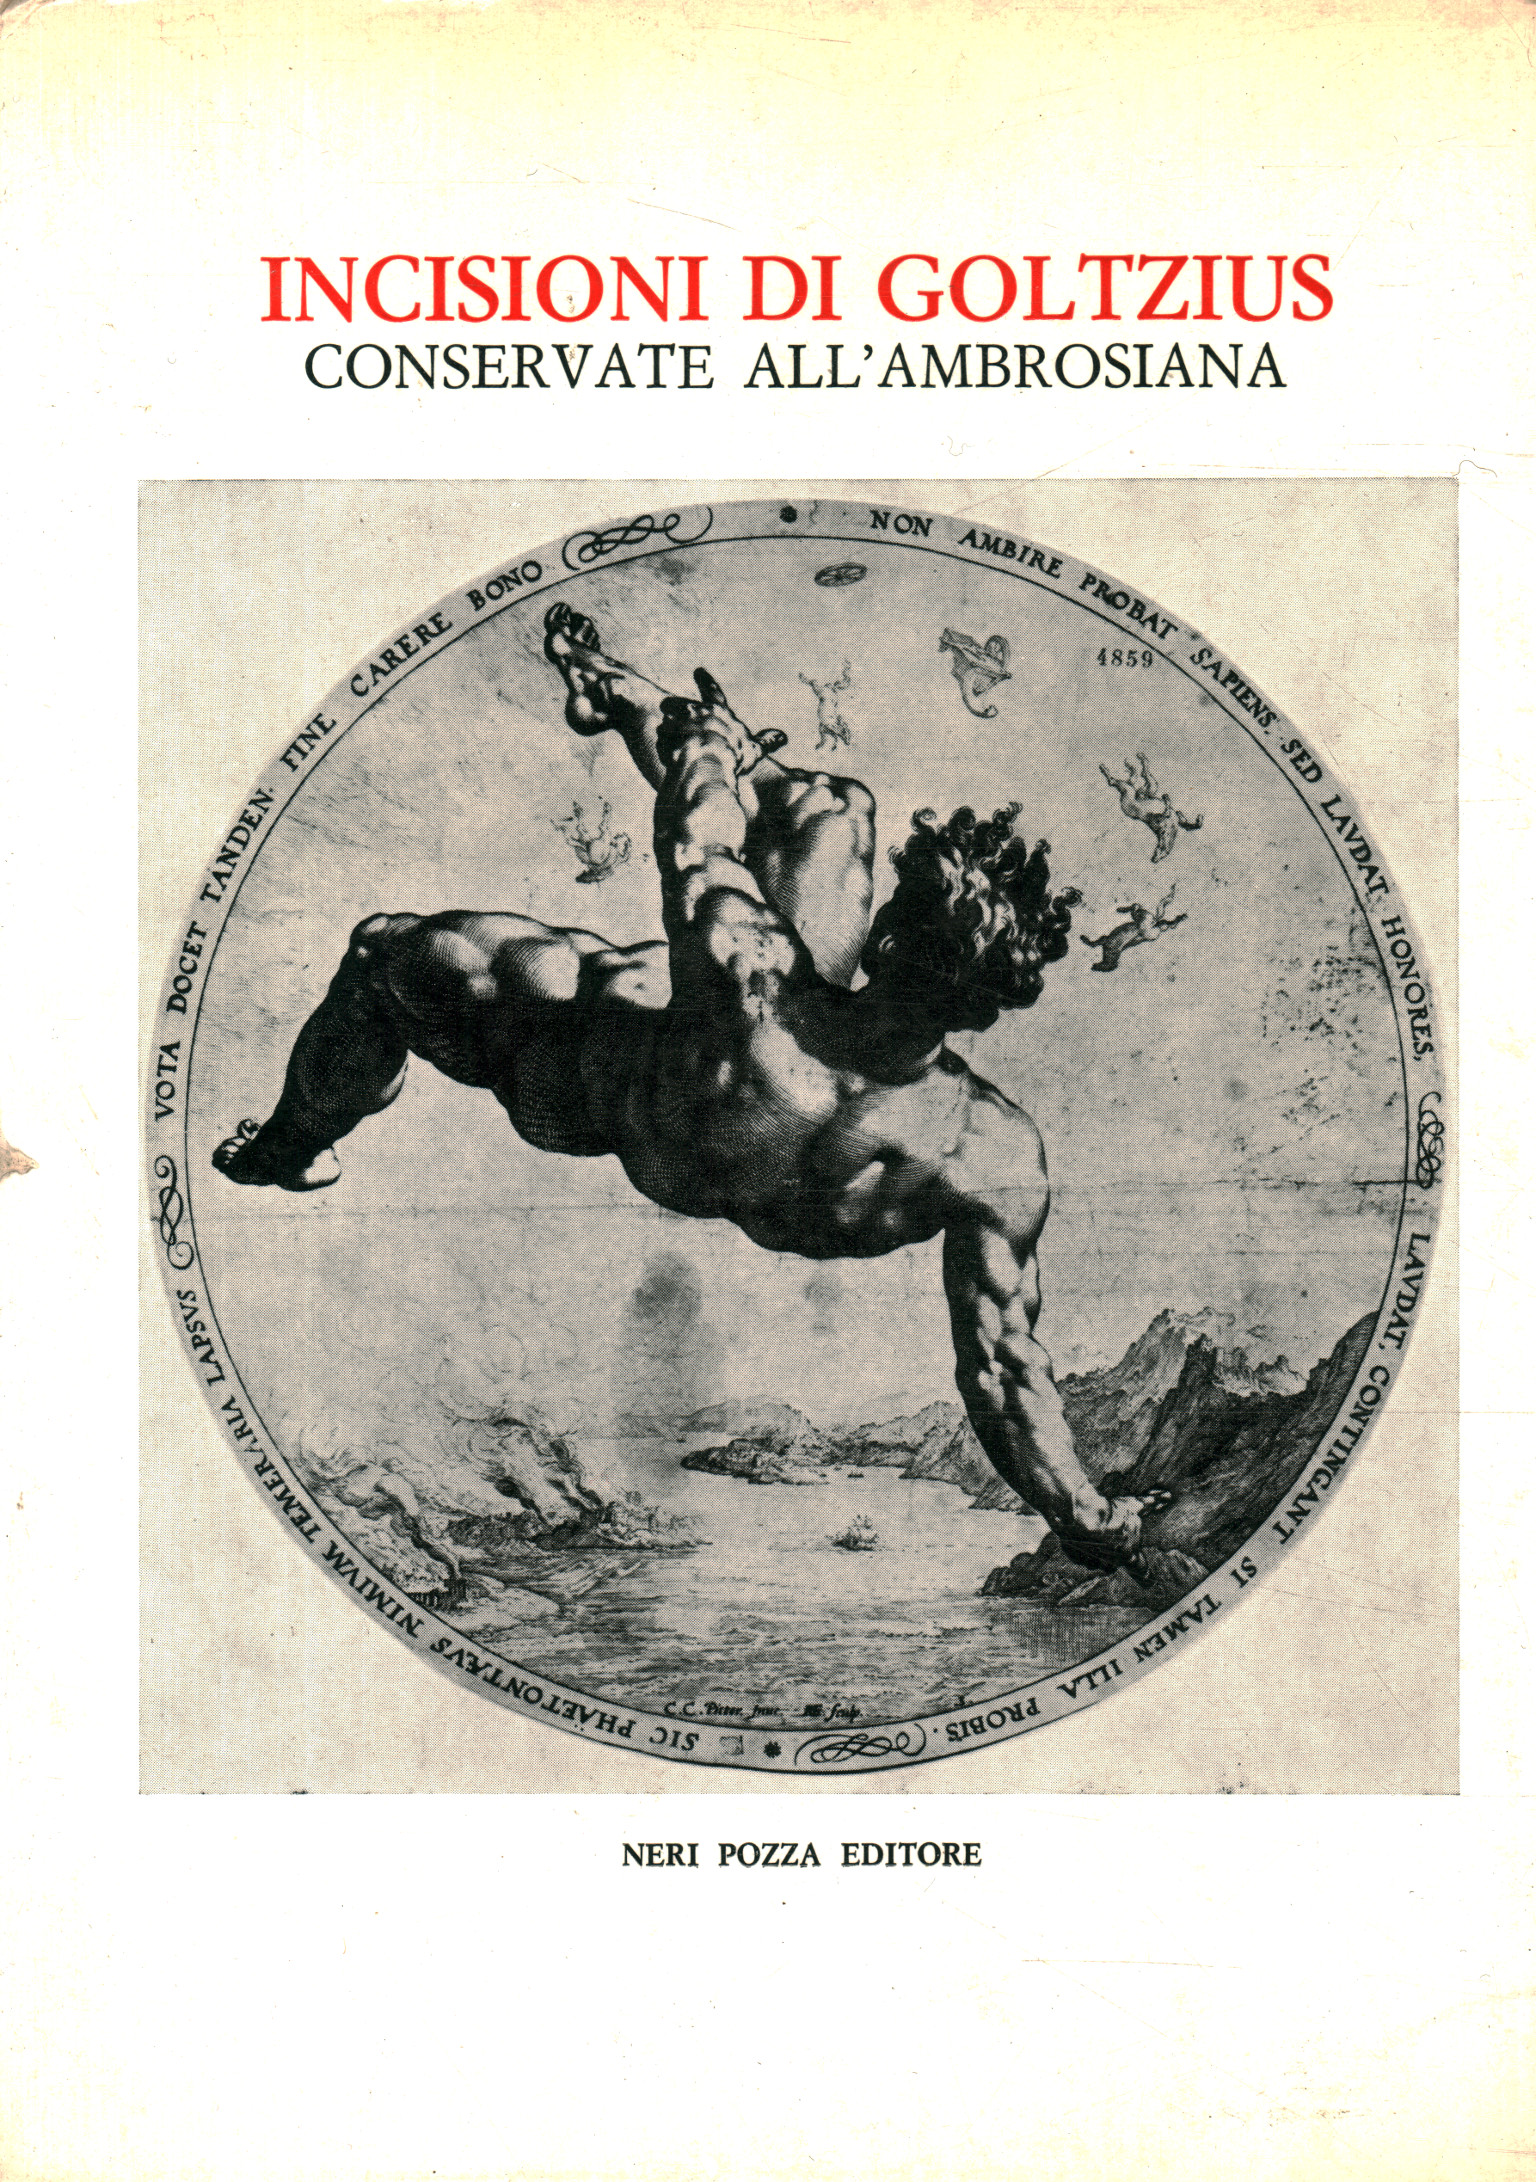 Engravings by Goltzius conserved at apost